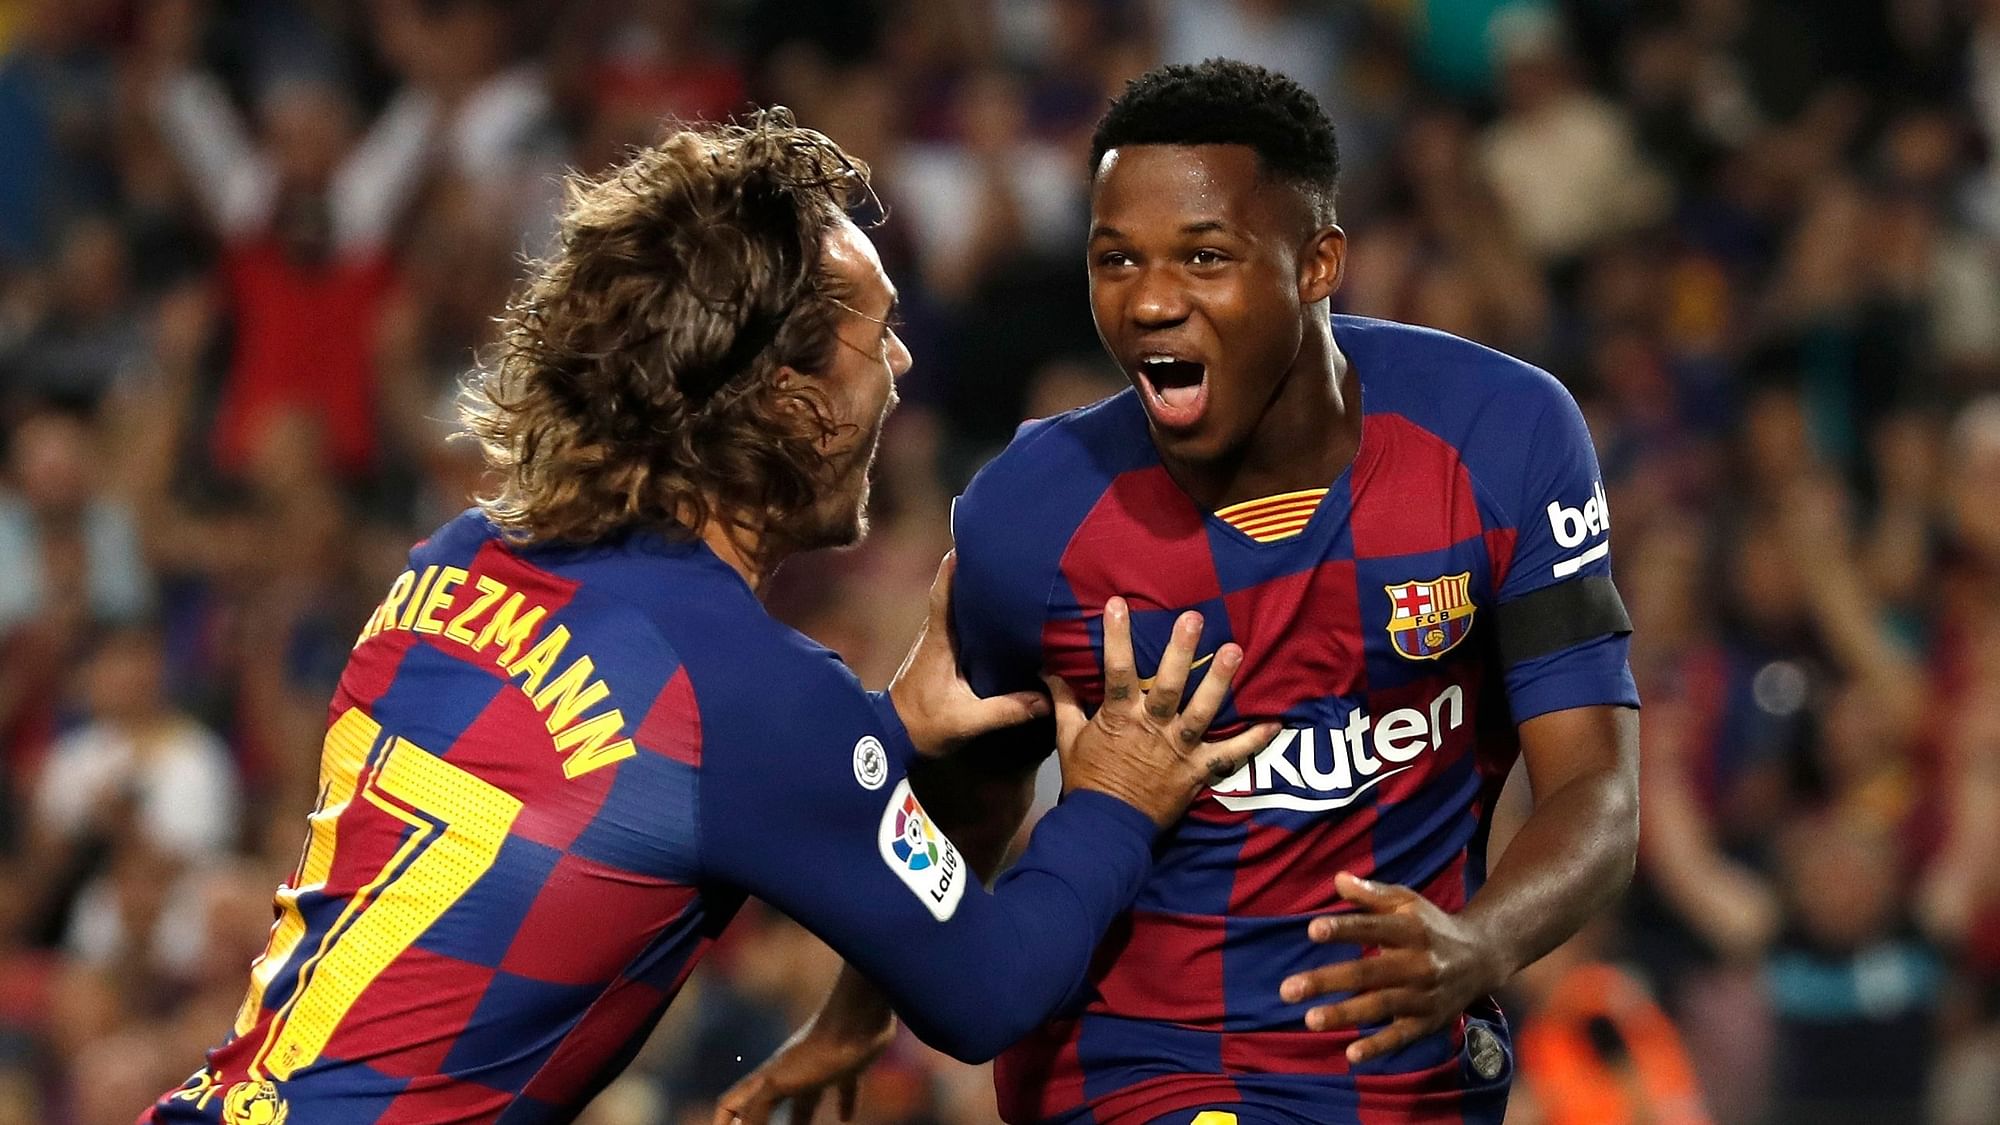 Barcelona’s Ansu Fati, right, celebrates with teammate Barcelona’s Antoine Griezmann after scoring the opening goal during the Spanish La Liga soccer match between FC Barcelona and Valencia CF at the Camp Nou stadium in Barcelona.